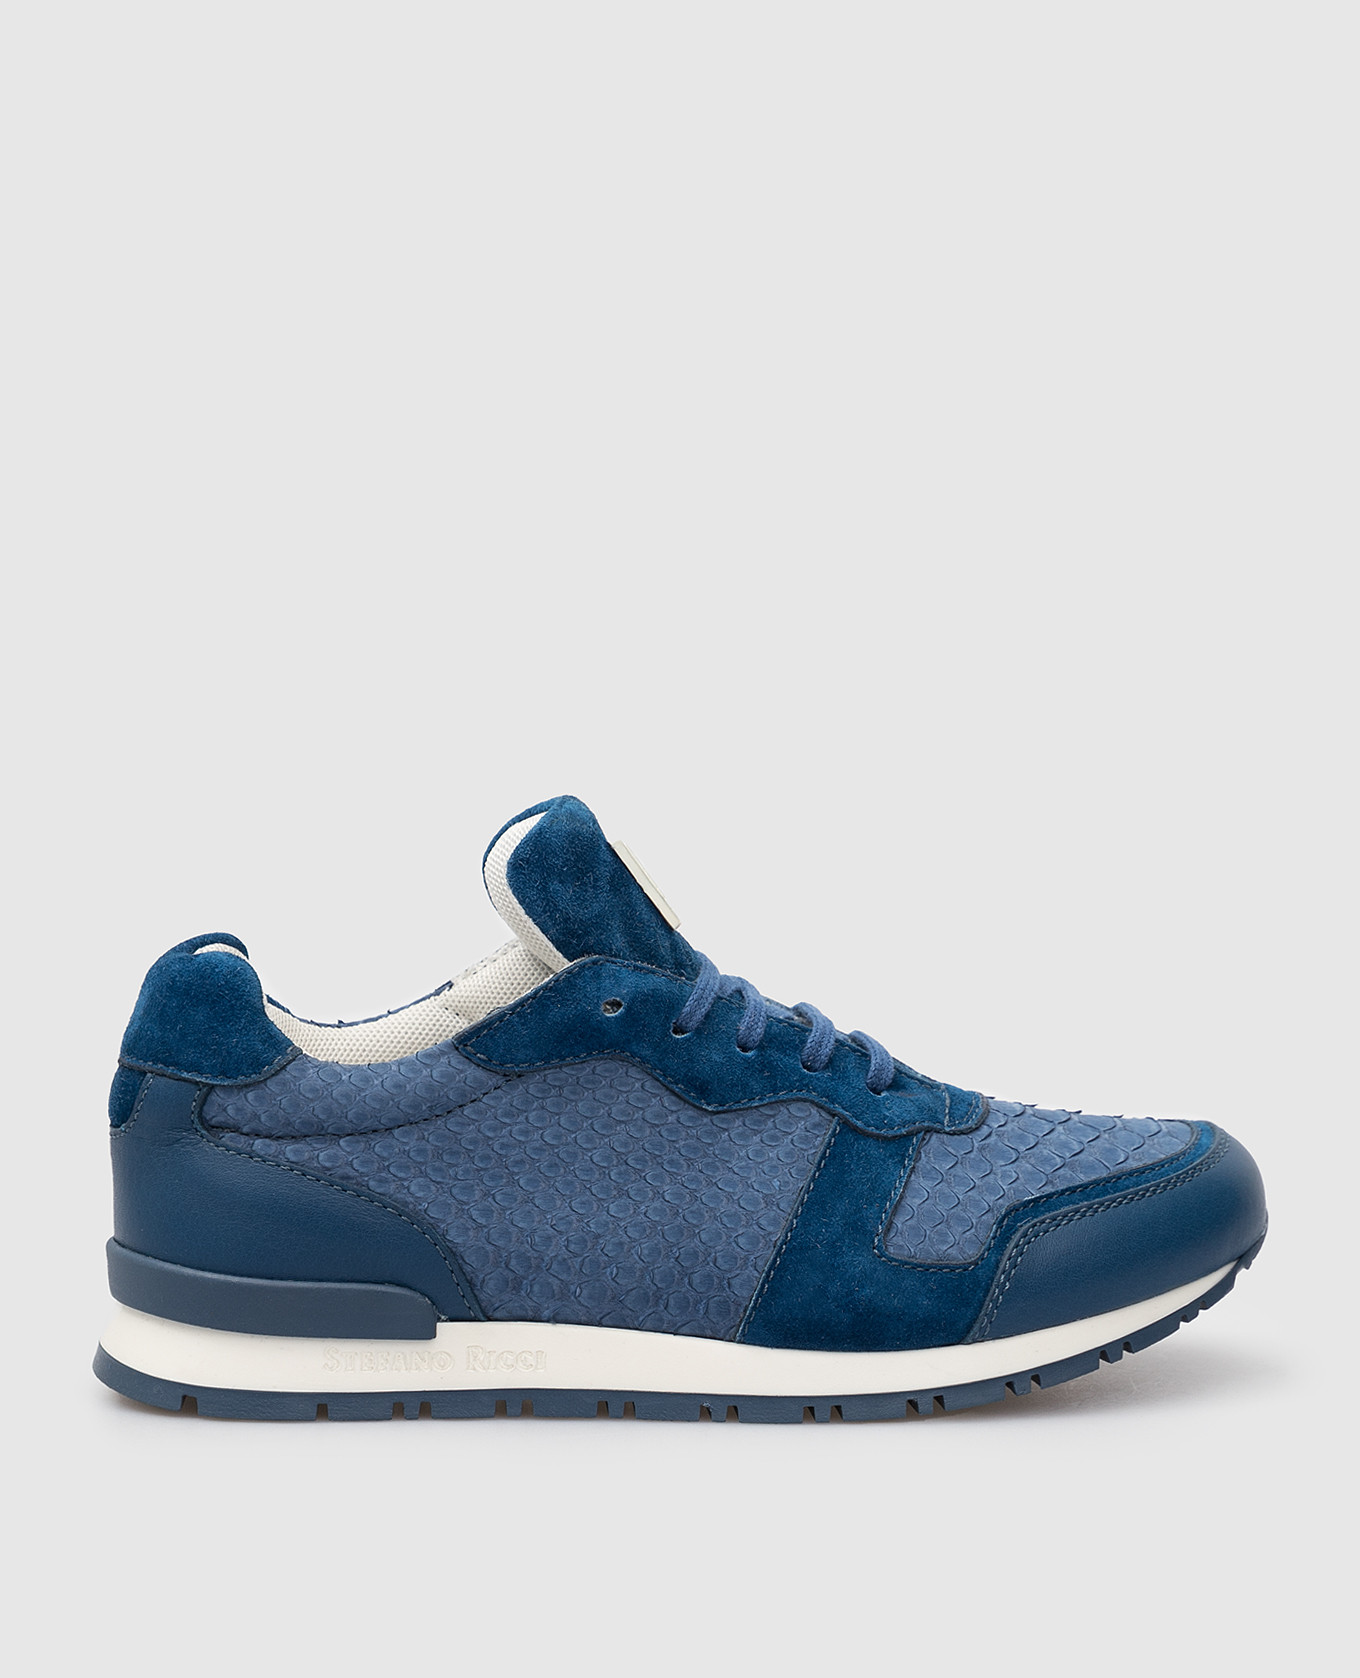 Children's blue python and suede sneakers